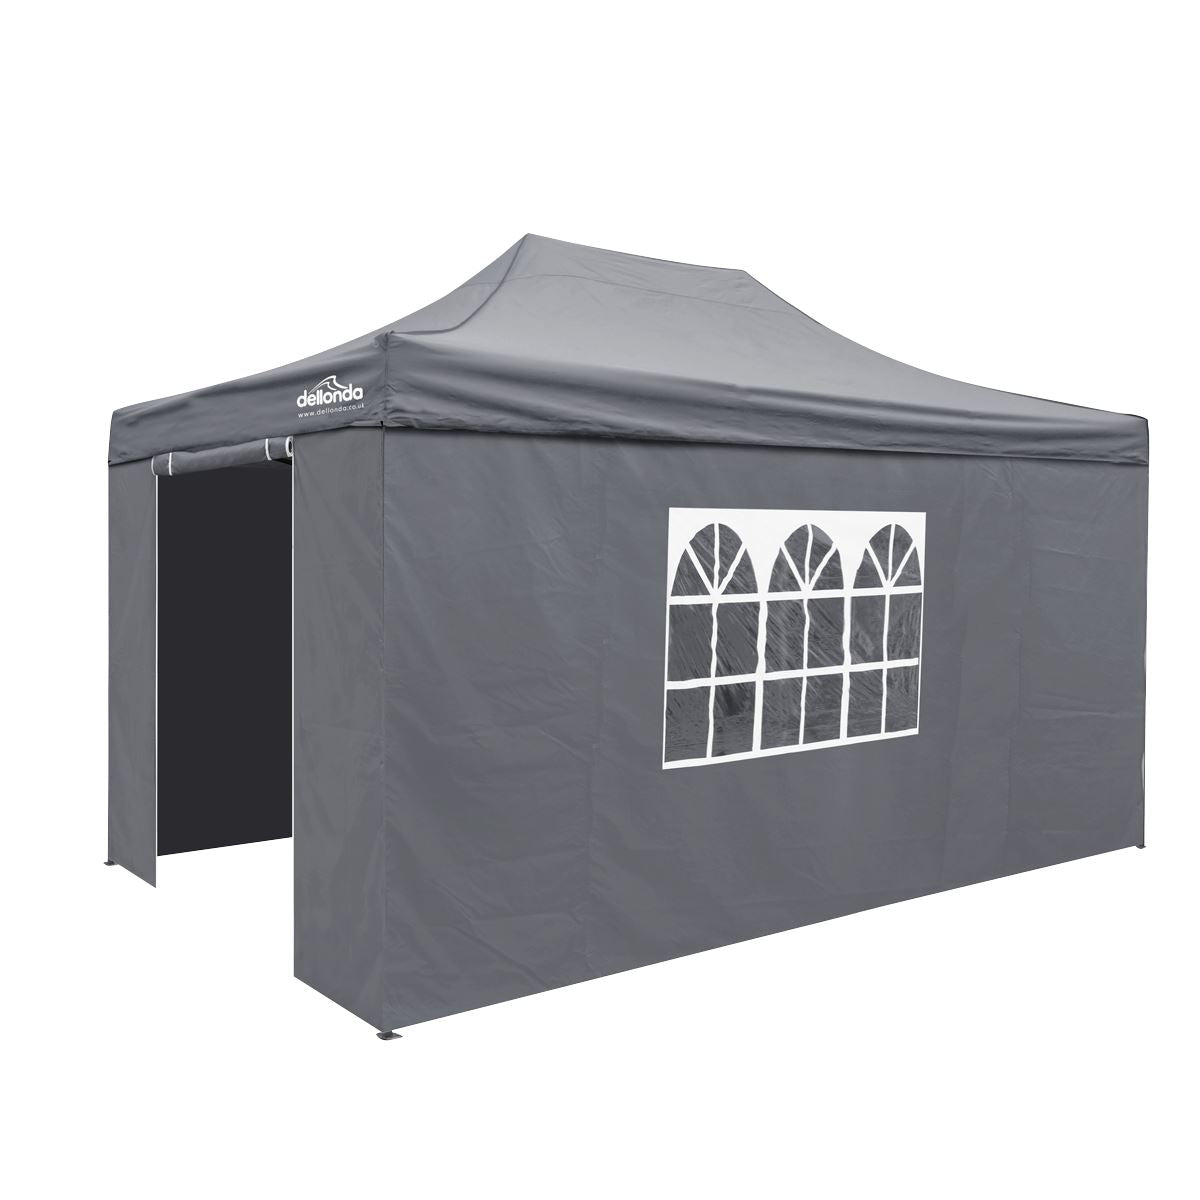 Dellonda Premium 3x4.5m Pop-Up Gazebo & Side Walls, PVC Coated, Water Resistant Fabric with Carry Bag, Rope, Stakes & Weight Bags - Grey